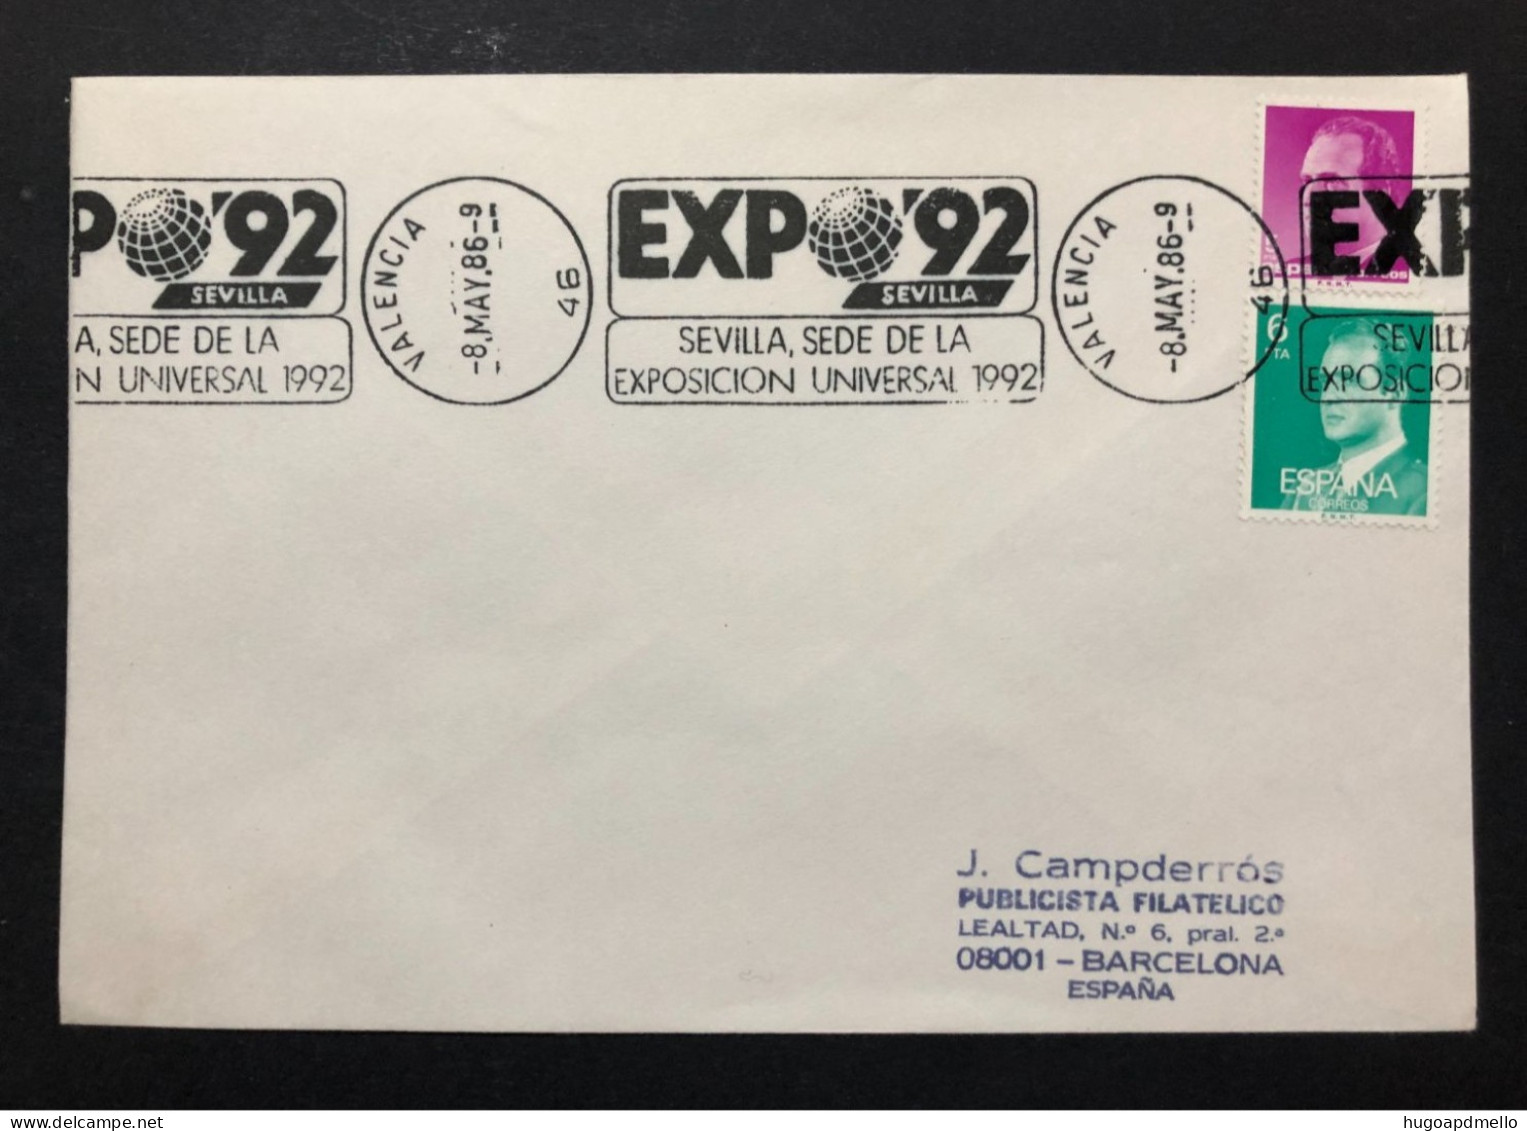 SPAIN, Cover With Special Cancellation « EXPO '92 », « VALENCIA Postmark », 1986 - 1992 – Séville (Espagne)